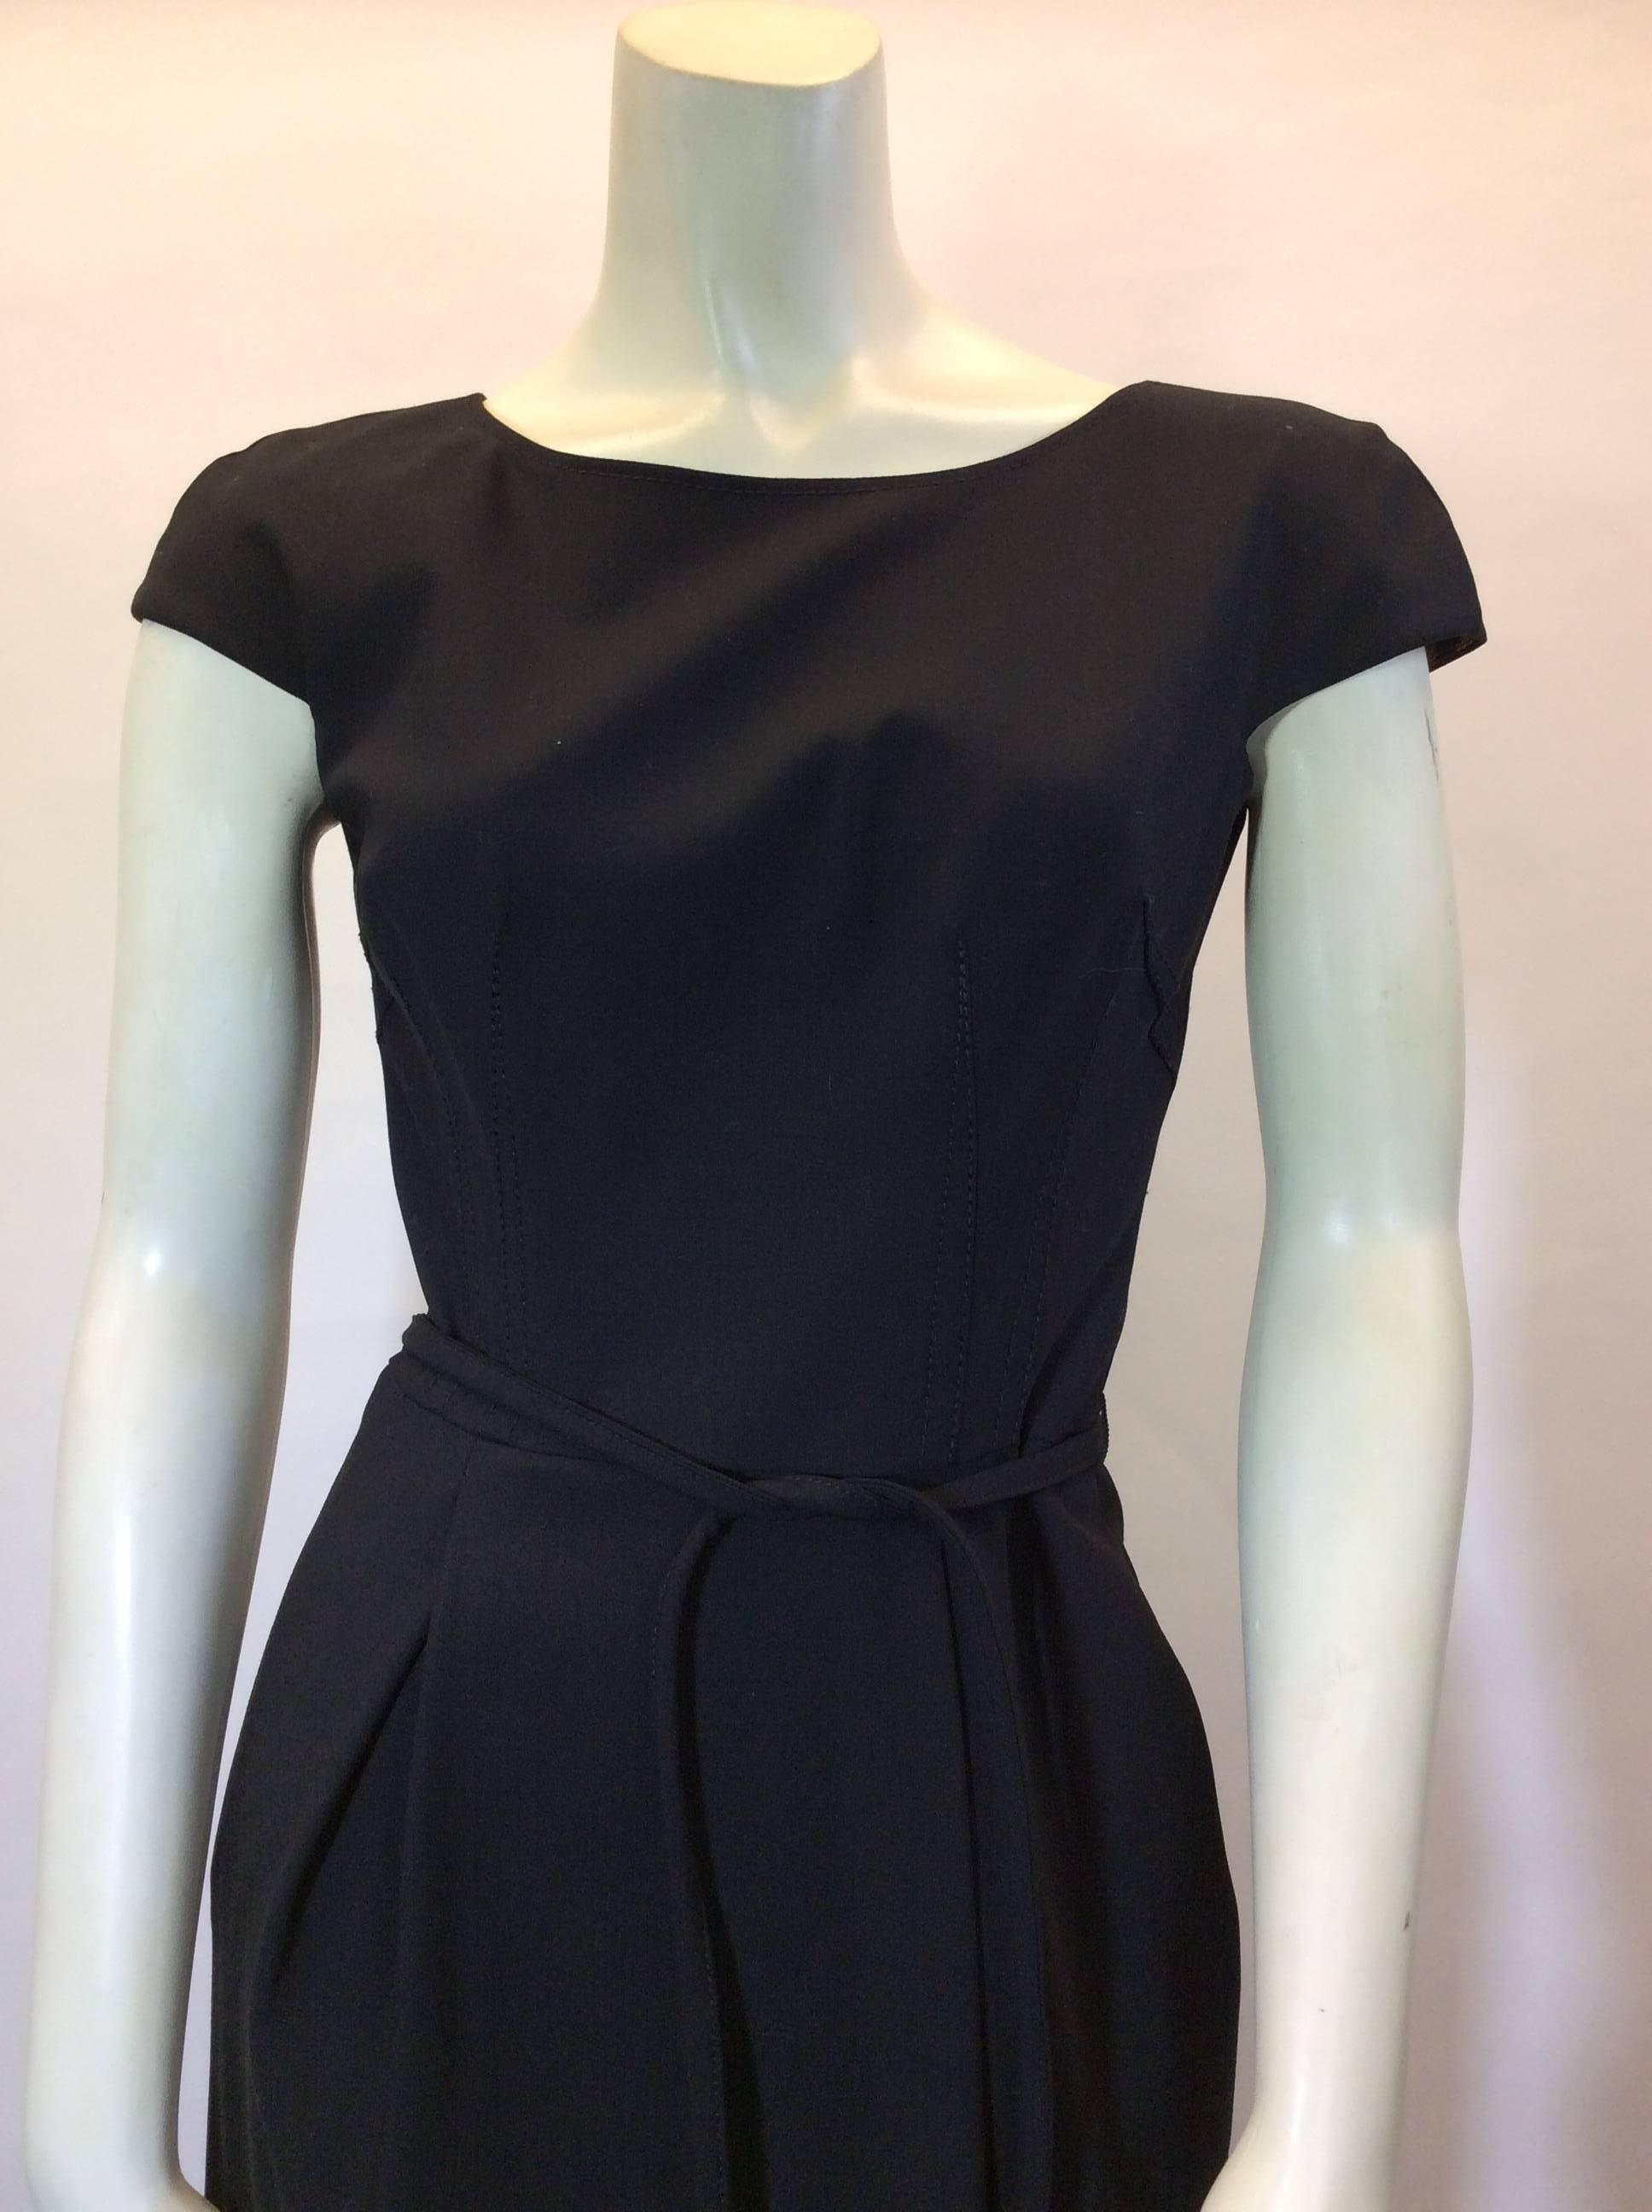 Dolce & Gabbana
Belted
Short sleeve, fitted 
Size 40
97% wool
Lined - Cupro & Spandex